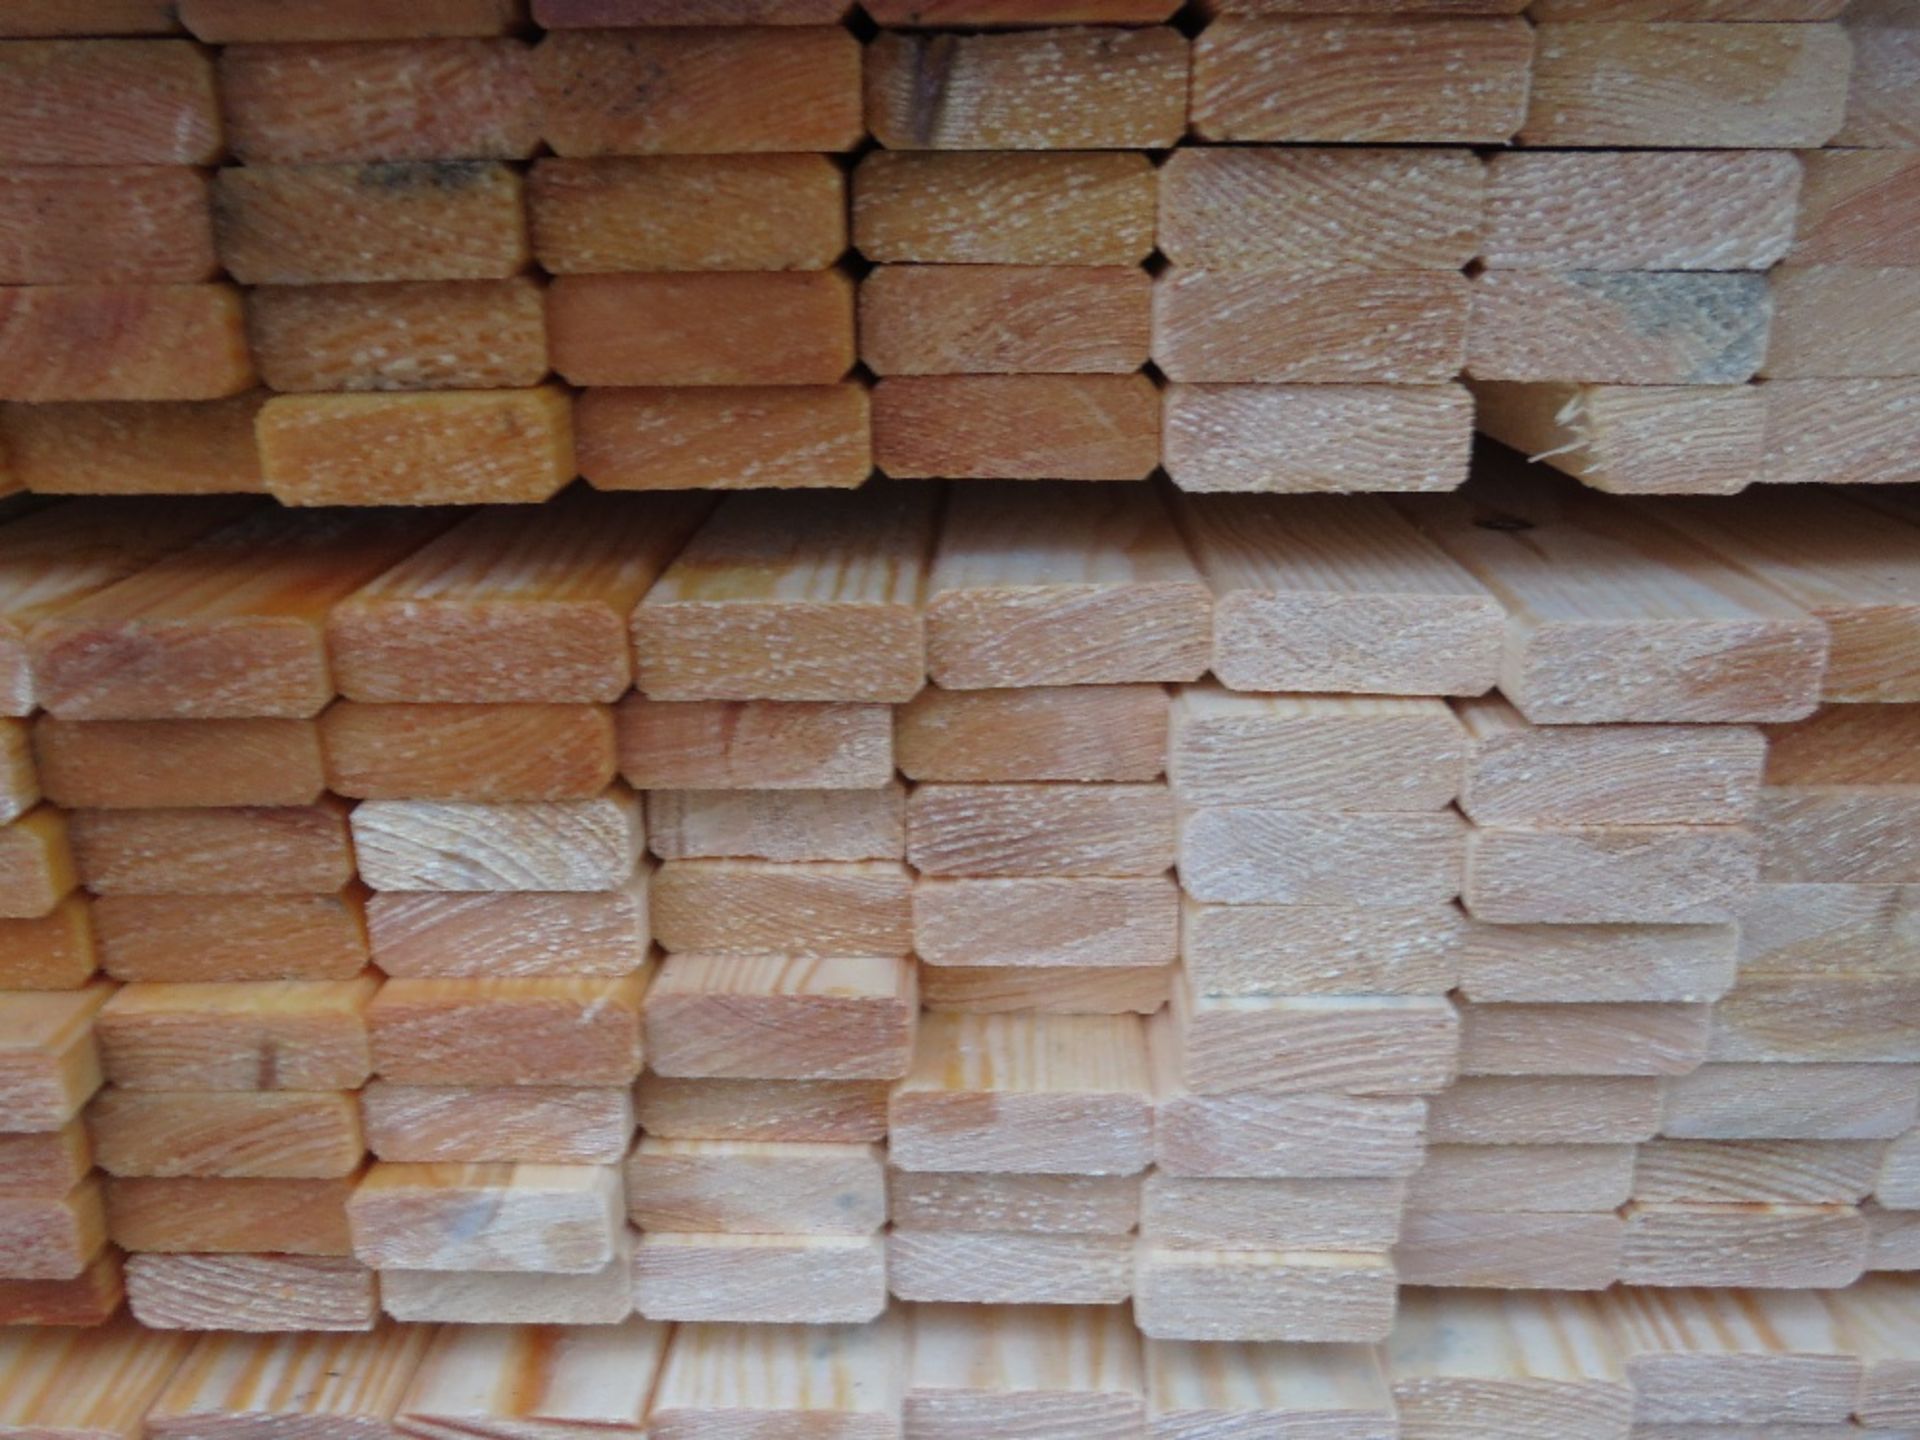 1 X EXTRA LARGE PACK OF UNTREATED VENETIAN FENCE TIMBER CLADDING SLATS: 1.83M LENGTH X 17MM DEPTH X - Image 2 of 2